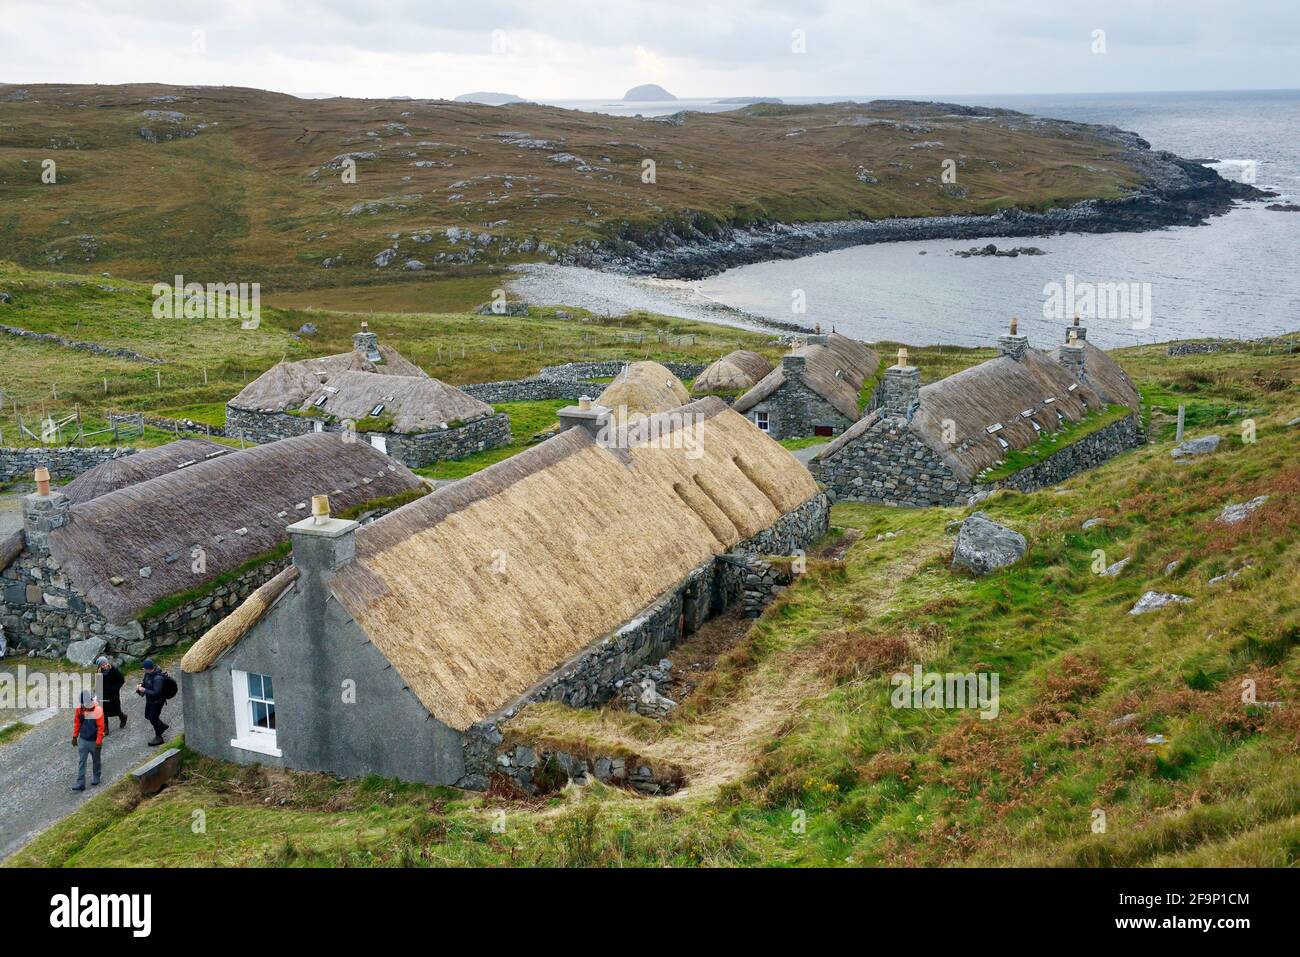 Blackhouse Village. Restored crofting fishing township of Garenin, Na Gearrannan, on north west coast of Lewis, Outer Hebrides.  Lived in until 1974 Stock Photo